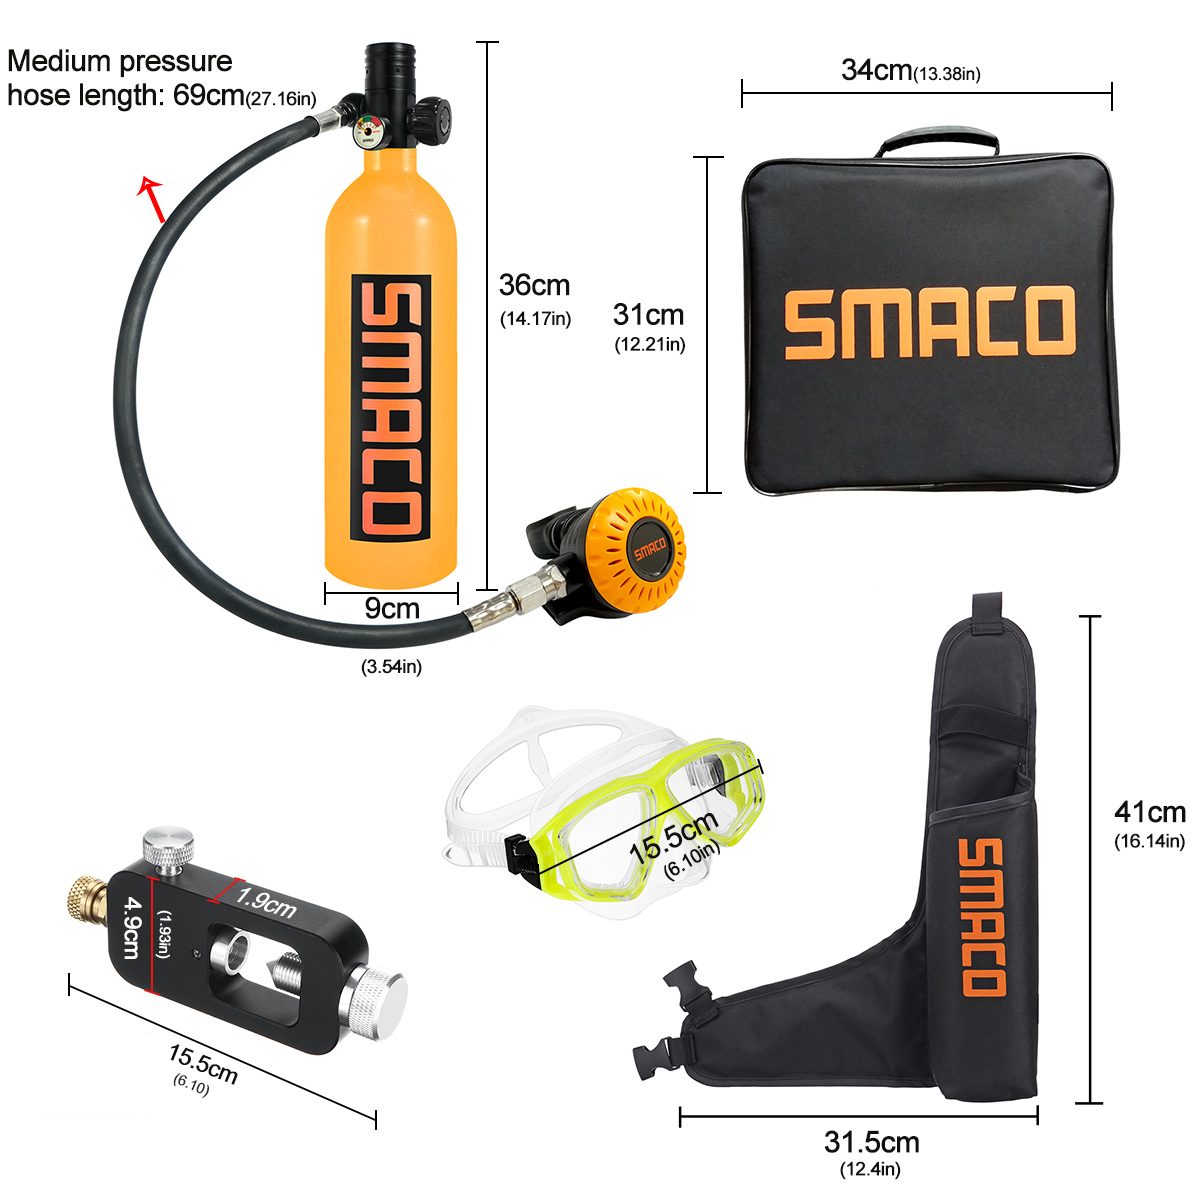 S400E-3000PSI-1L-Oxygen-Cylinder-Diving-Scuba-Adapter-Glasses-Equipment-Set-For-SMACO-1716984